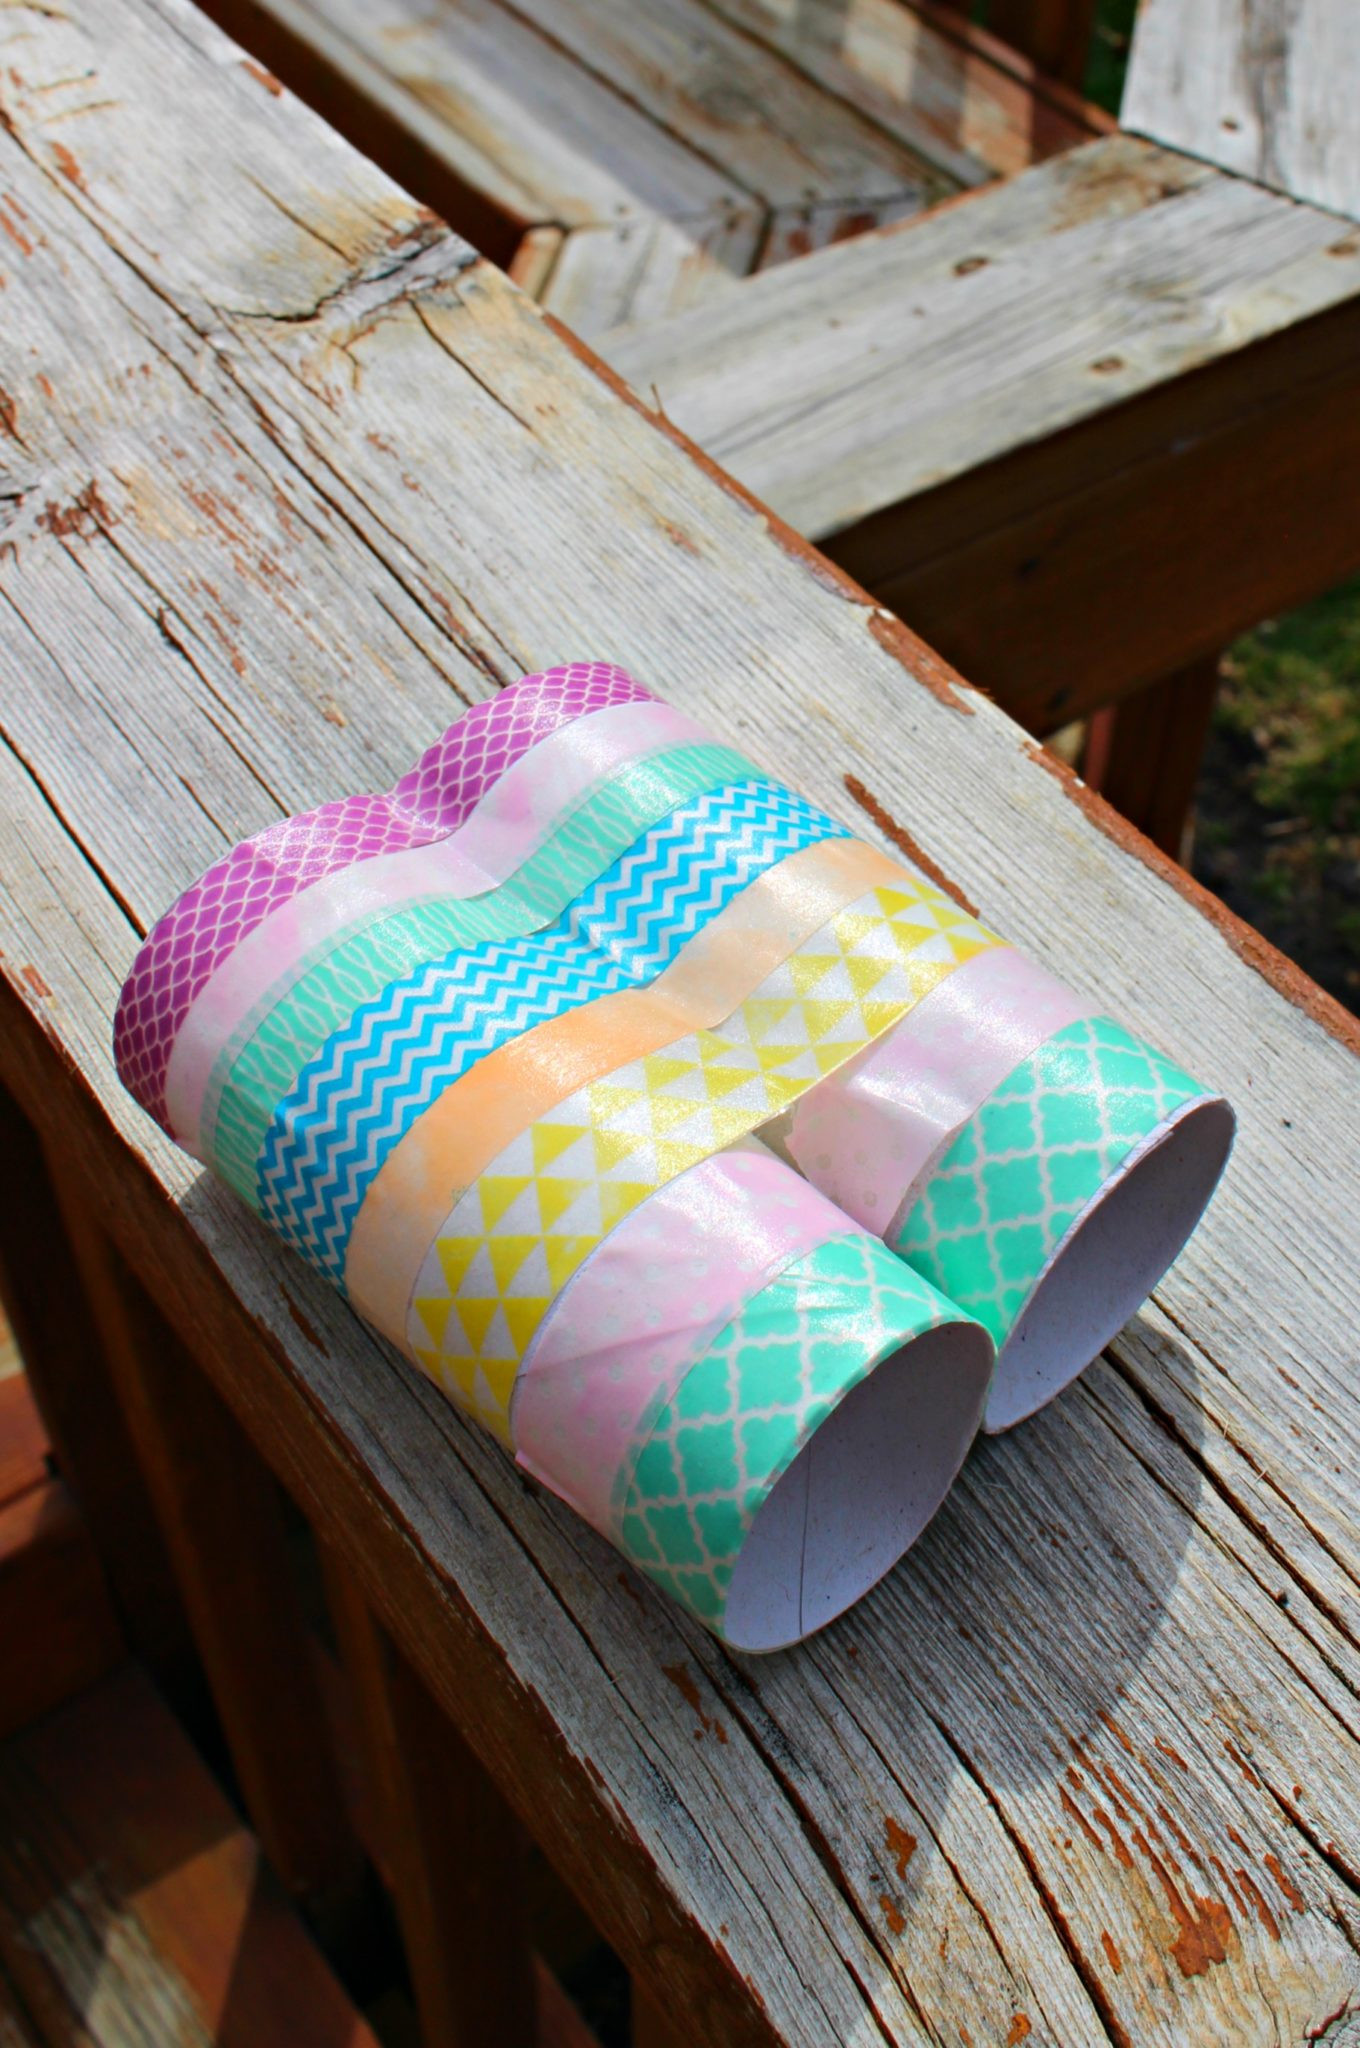 Crafting With Kids
 Binocular Craft For Kids With "I Spy Spring" Printable